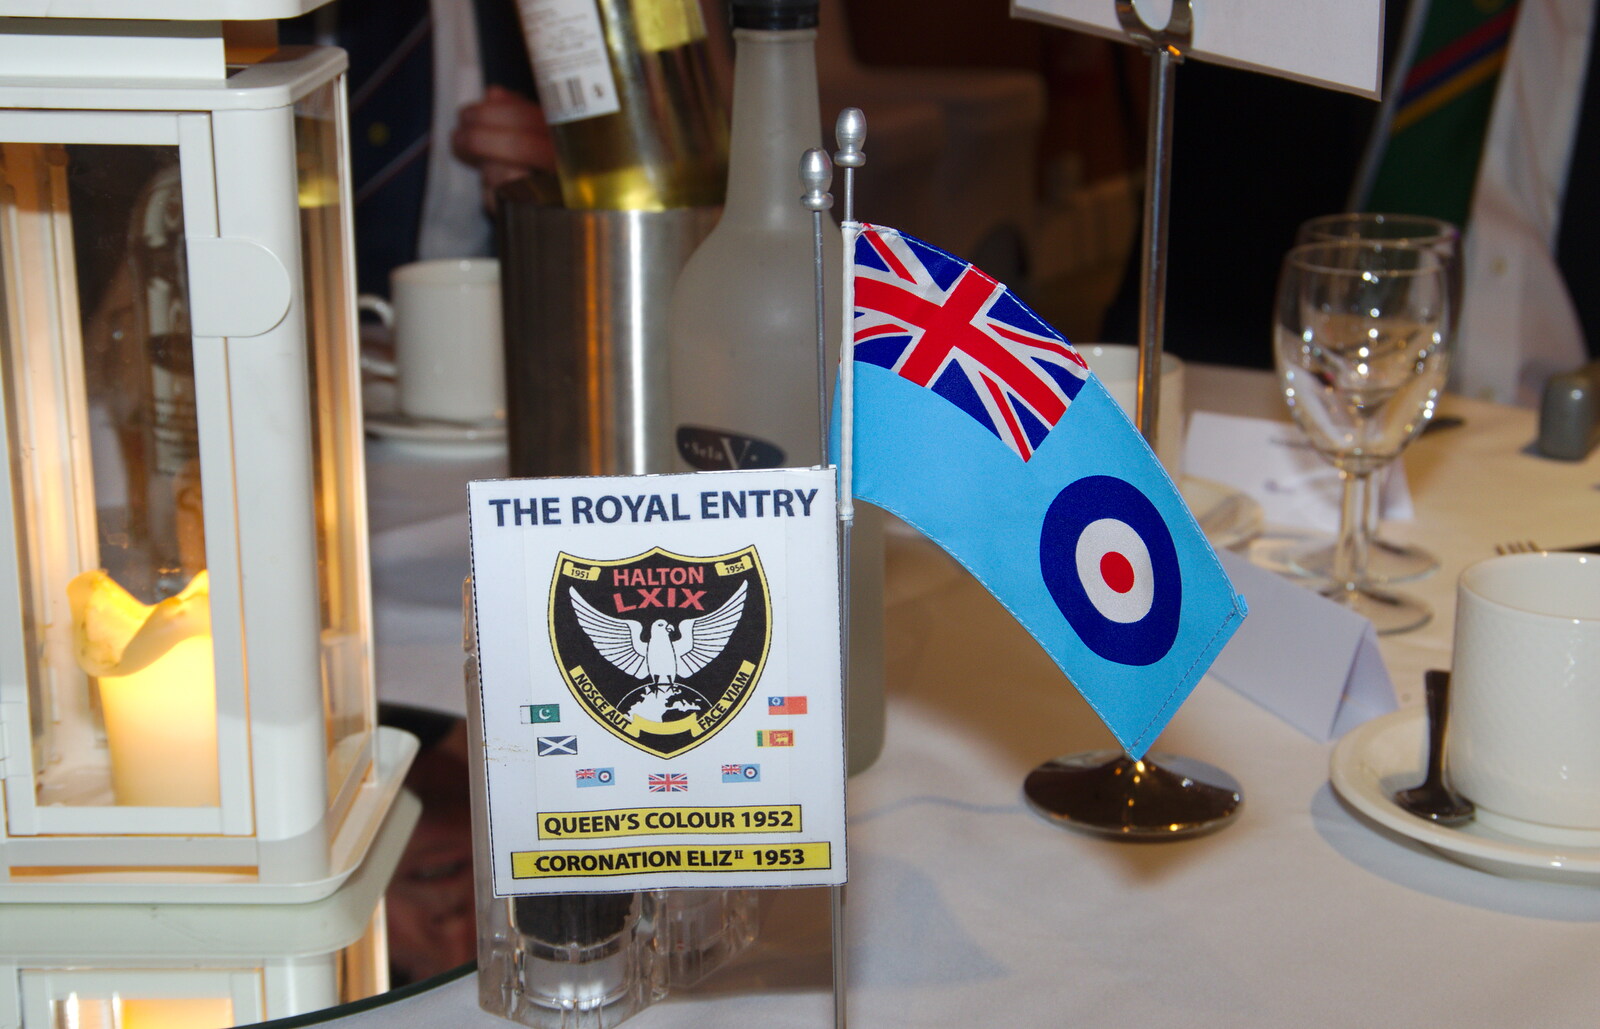 The Royal Entry badge and RAF ensign from Kenilworth Castle and the 69th Entry Reunion Dinner, Stratford, Warwickshire - 14th September 2019